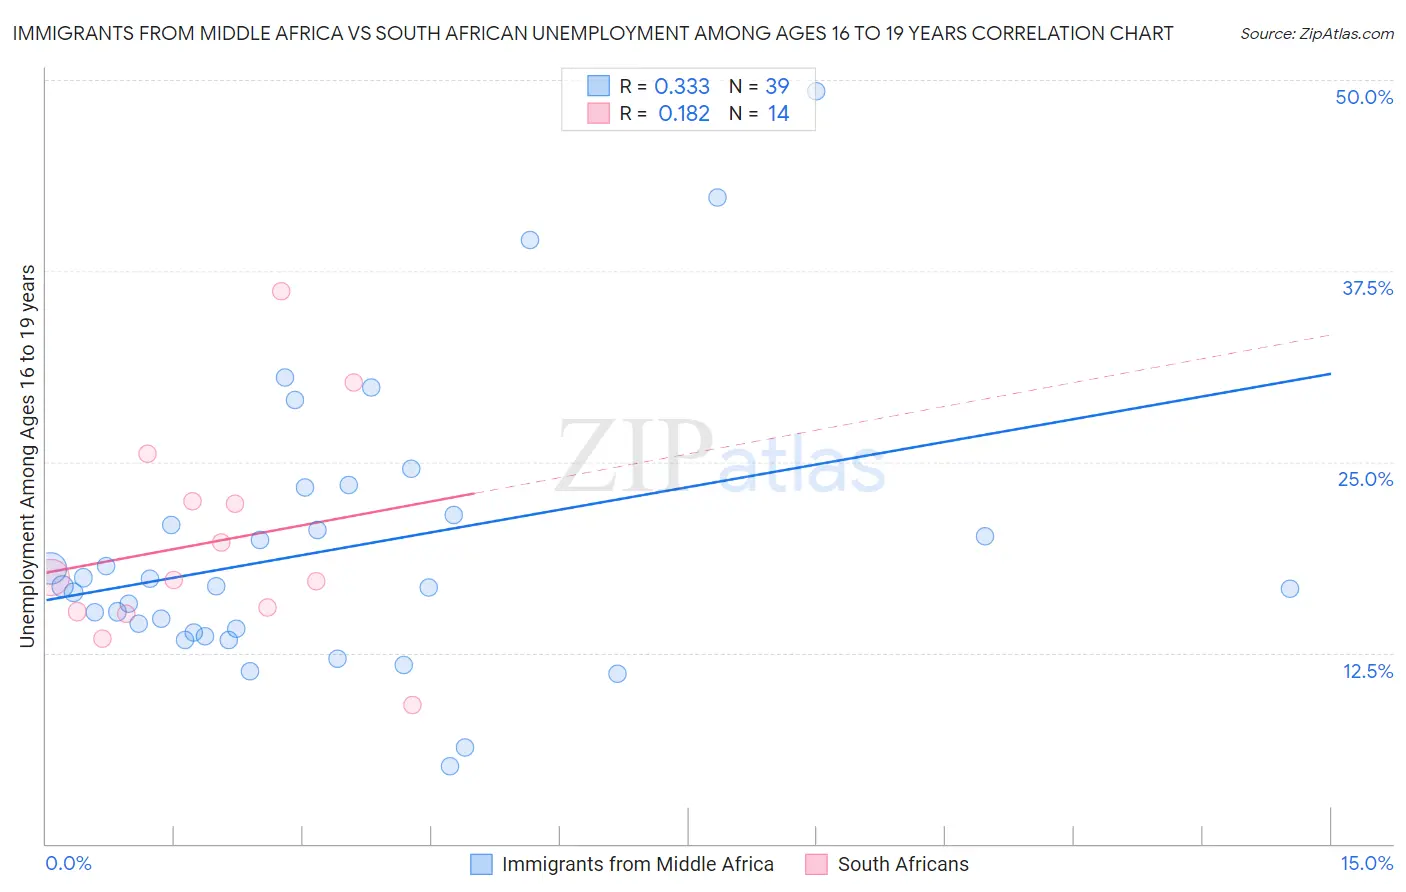 Immigrants from Middle Africa vs South African Unemployment Among Ages 16 to 19 years